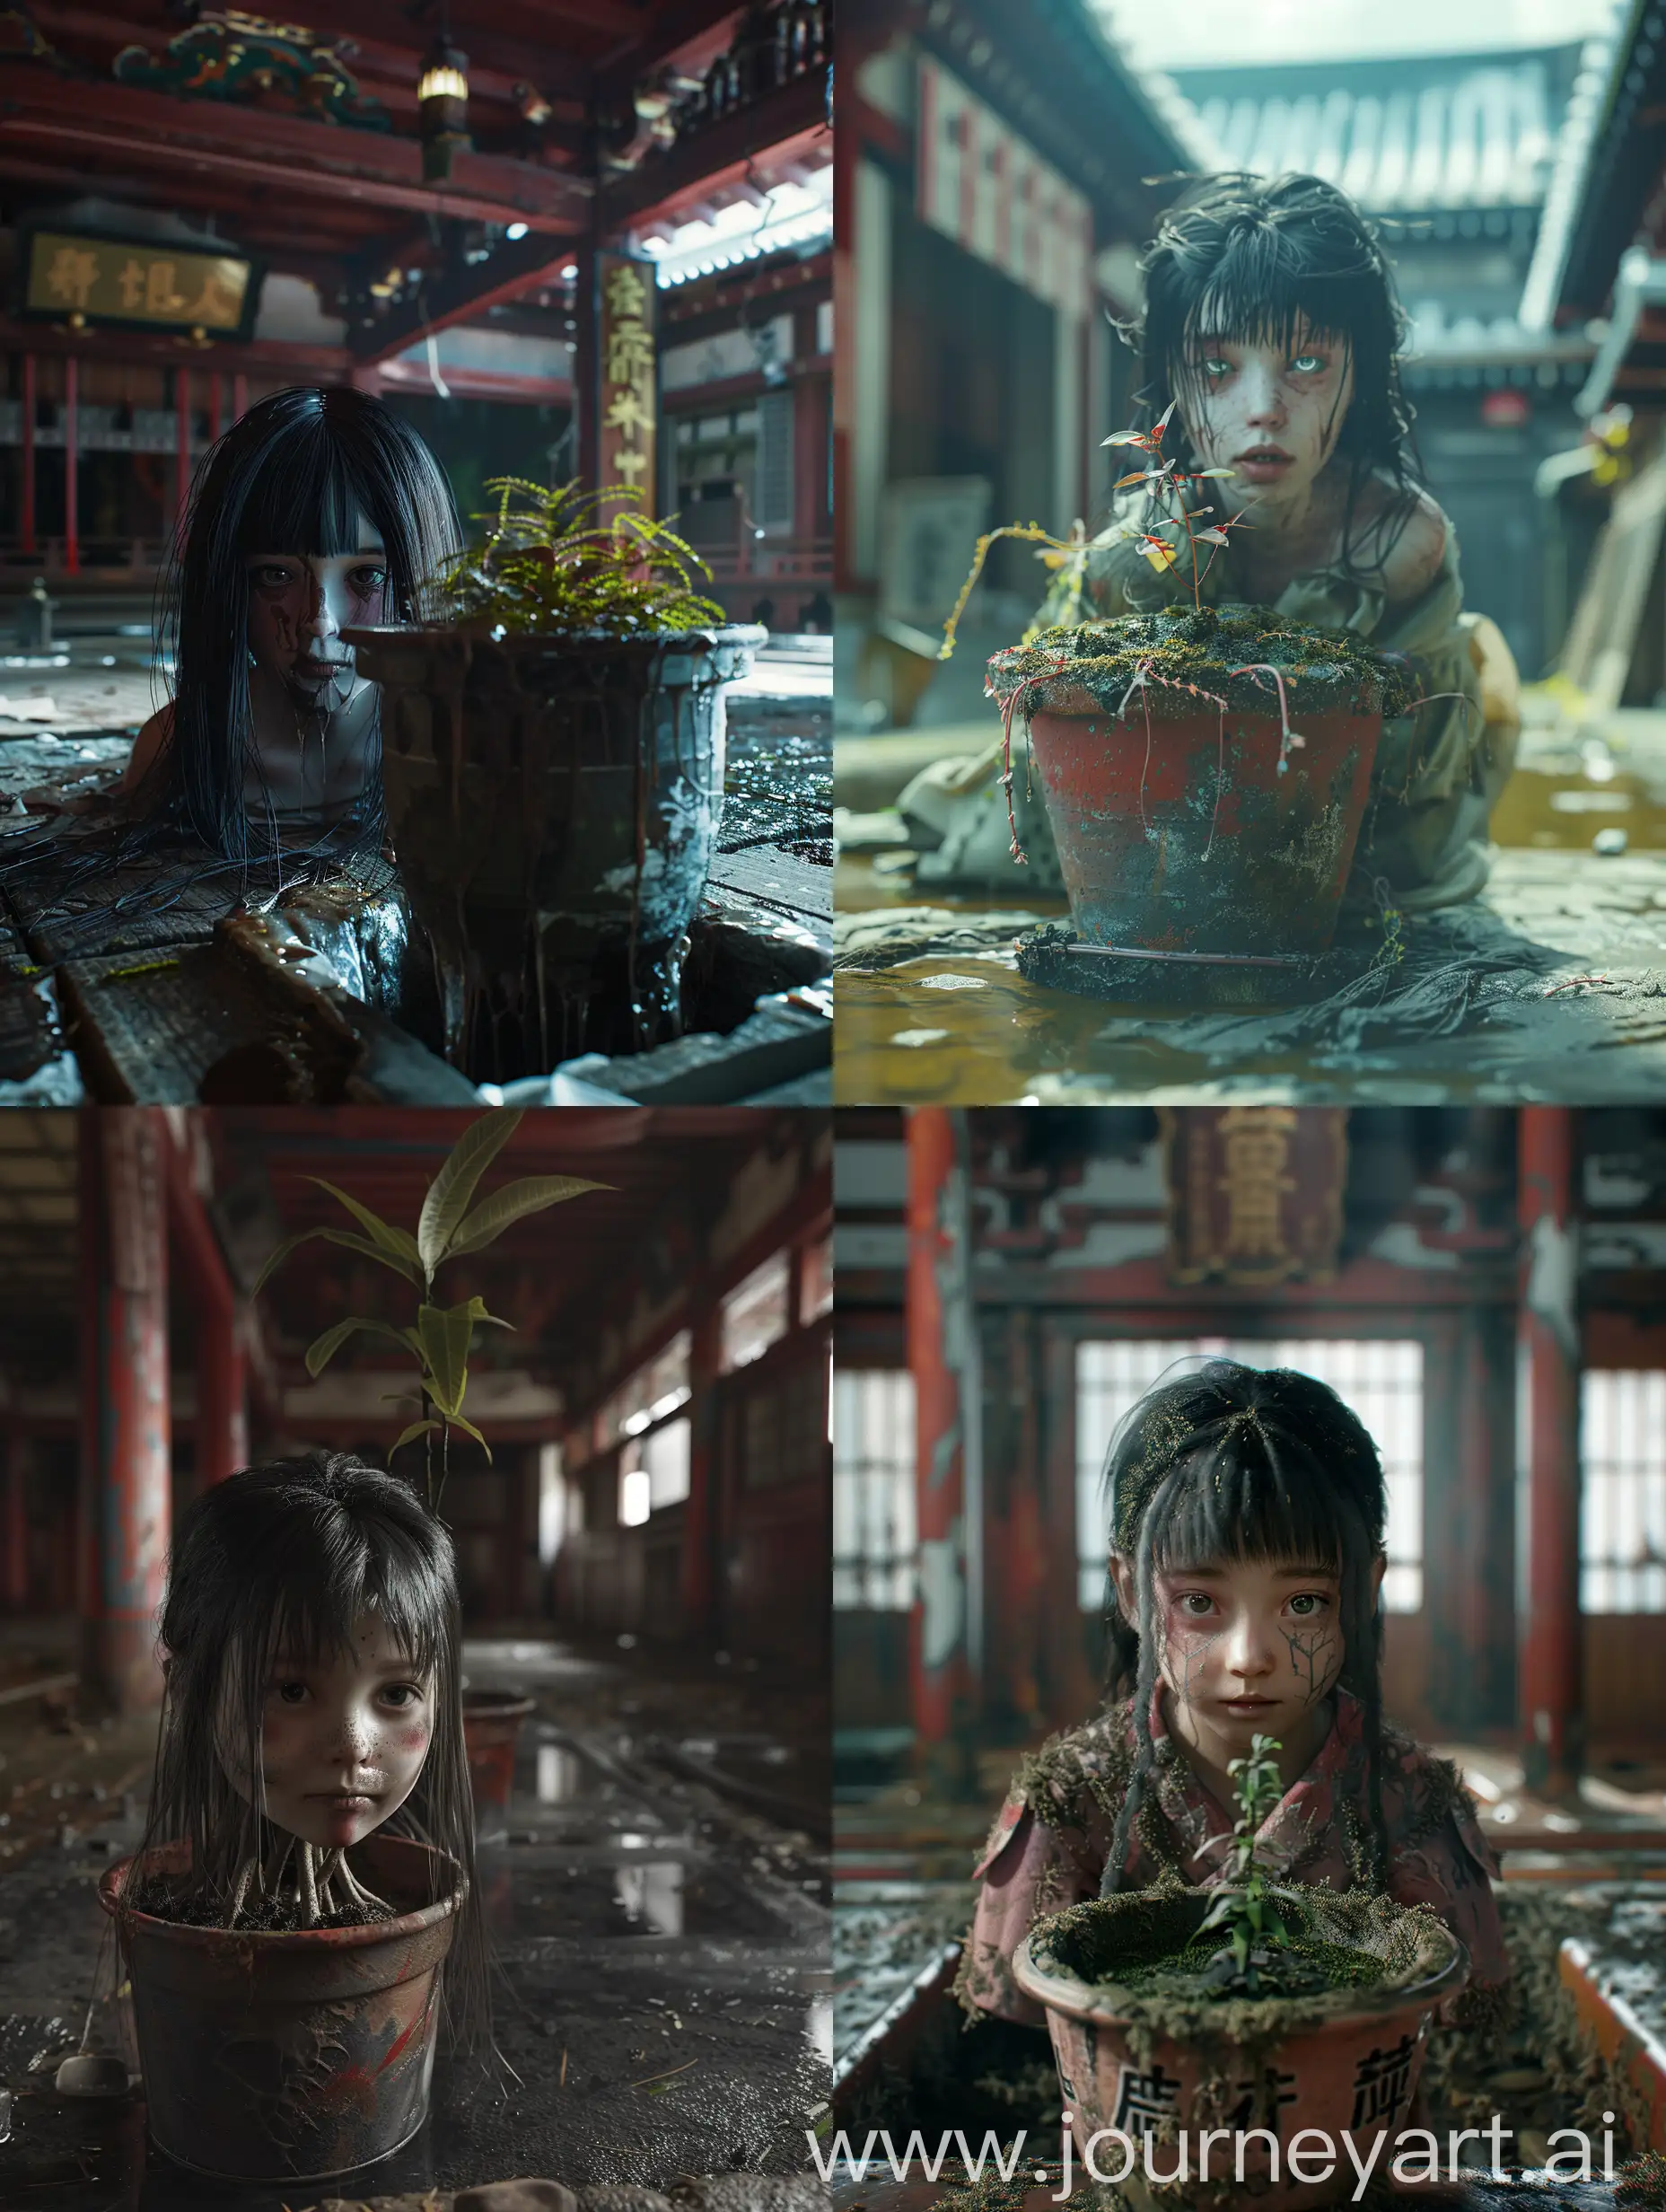 Cinematic Shot Subject: cinematic, realism, Using (((imagination))) to craft a photorealistic representation of an unusual fantasy dream, this image should be a panoramic shot, skillfully captured through an EE 70mm lens, providing a professional movie feel. Capturing an abandoned Japanese temple, Withered girl planted in pot,  Japan yokai, The UHD camera captures every detail of this moment, highlighting the colors and textures. With Scorsese's expert direction, this scene exudes drama, Generate a cinematic and highly detailed Al image, Render her in a photorealistic style, cinematic, capturing the fine details of her features and surroundings. Pay close attention to realistic skin tones, textures, and lighting conditions. Ensure the image is in high resolution, such as 8K, to showcase the intricate details and allow